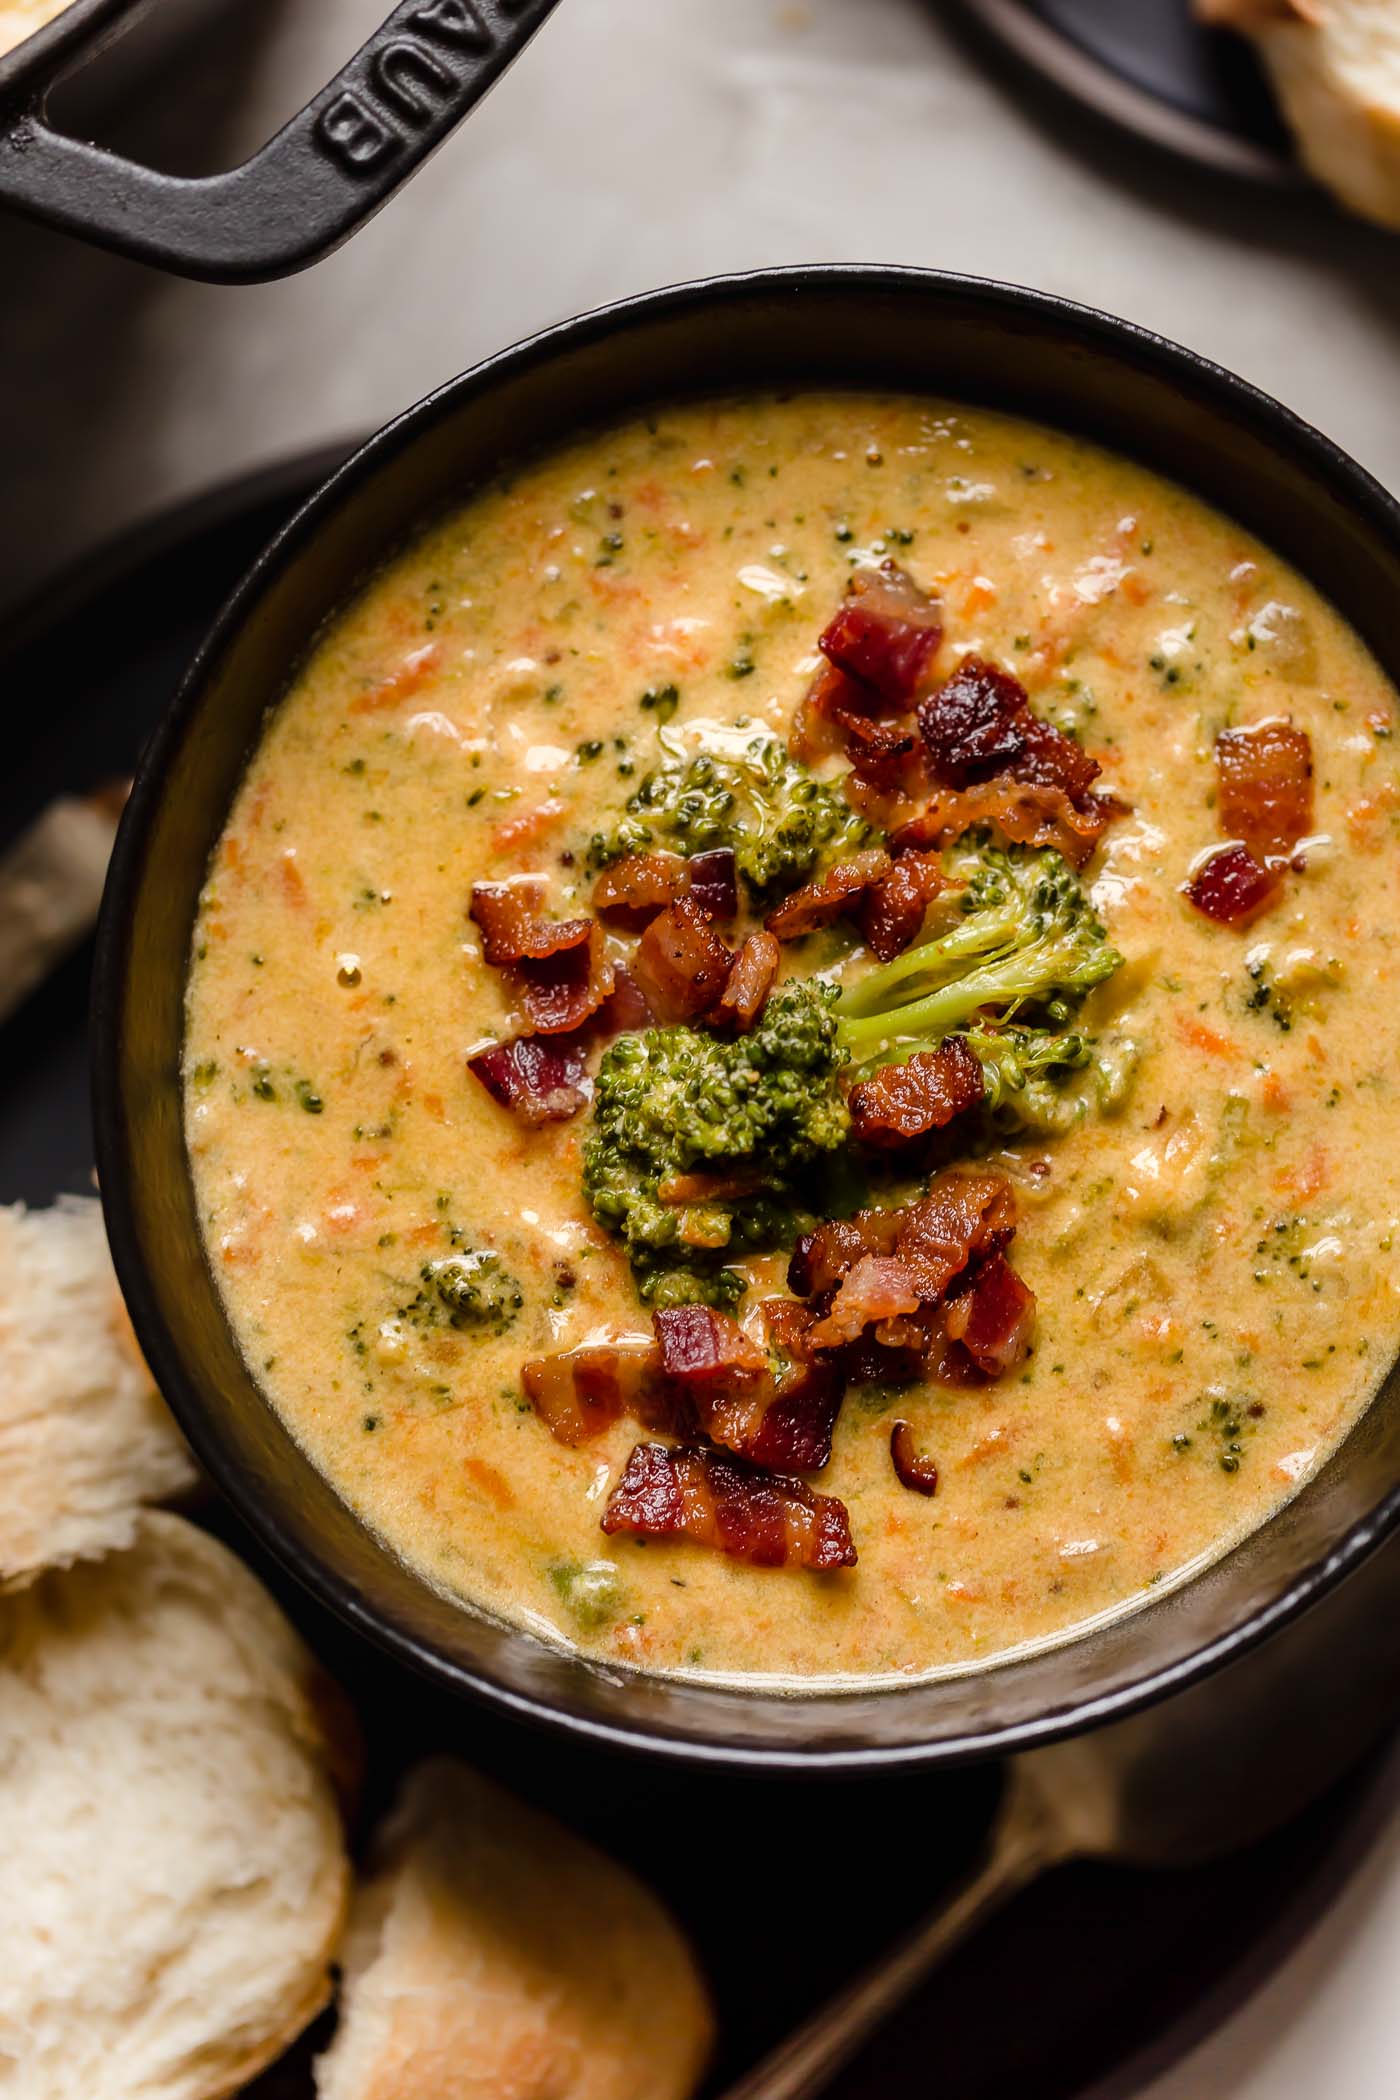 bacon beer cheese broccoli cheddar soup. a cross between two classic comforting soups, beer cheese soup & broccoli cheese soup, this bacon beer cheese broccoli cheddar soup is thick, luscious, creamy, & decadent. the ultimate comfort food dinner to warm you up on a cold night this winter! #playswellwithbutter #broccolicheddarsoup #broccolicheesesoup #bestbroccolicheesesoup #creamybroccolicheesesoup #beercheesesoup #bestbeercheesesoup #baconbeercheesesoup #comfortfood #comfortfoodrecipes